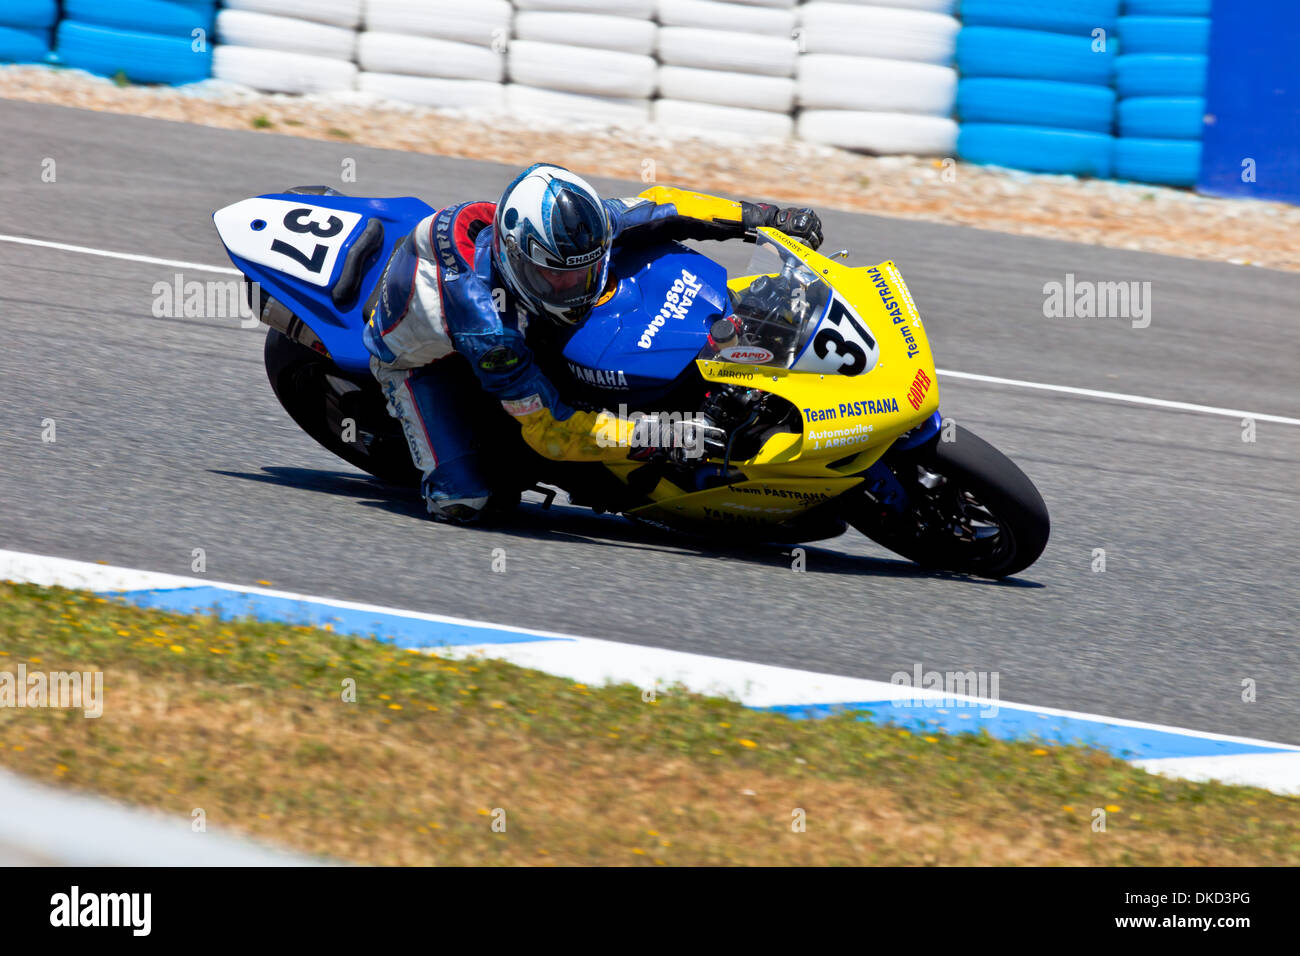 Stock Extreme motorcyclist Jorge Arroyo takes a curve in the CEV Championship race Stock Photo